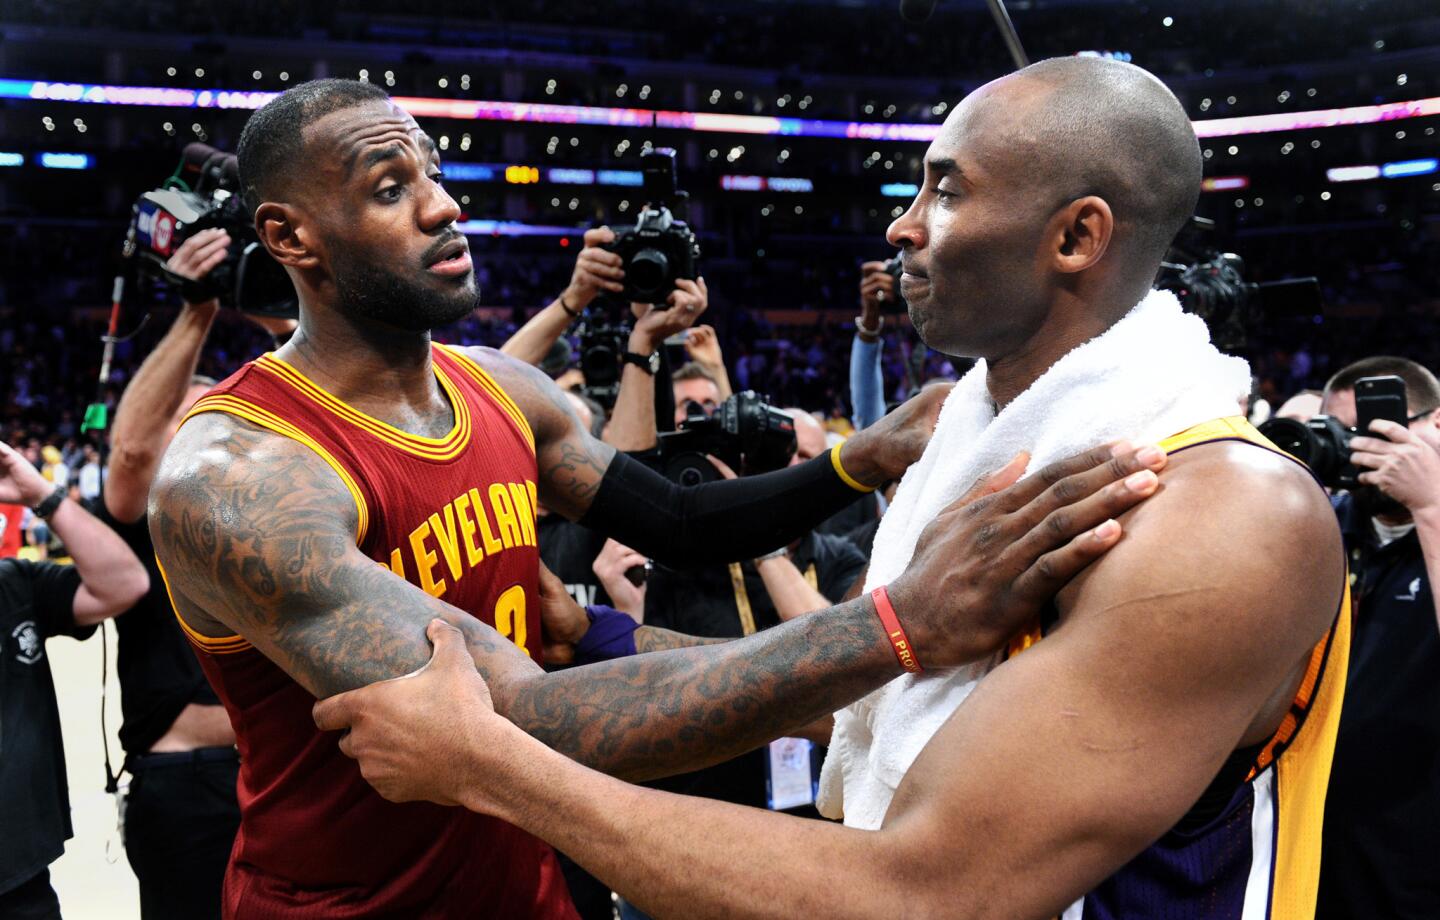 Kobe Bryant and the Cavaliers LeBron James hug after the last time they faced each other on the court at Staples Center, March 10.